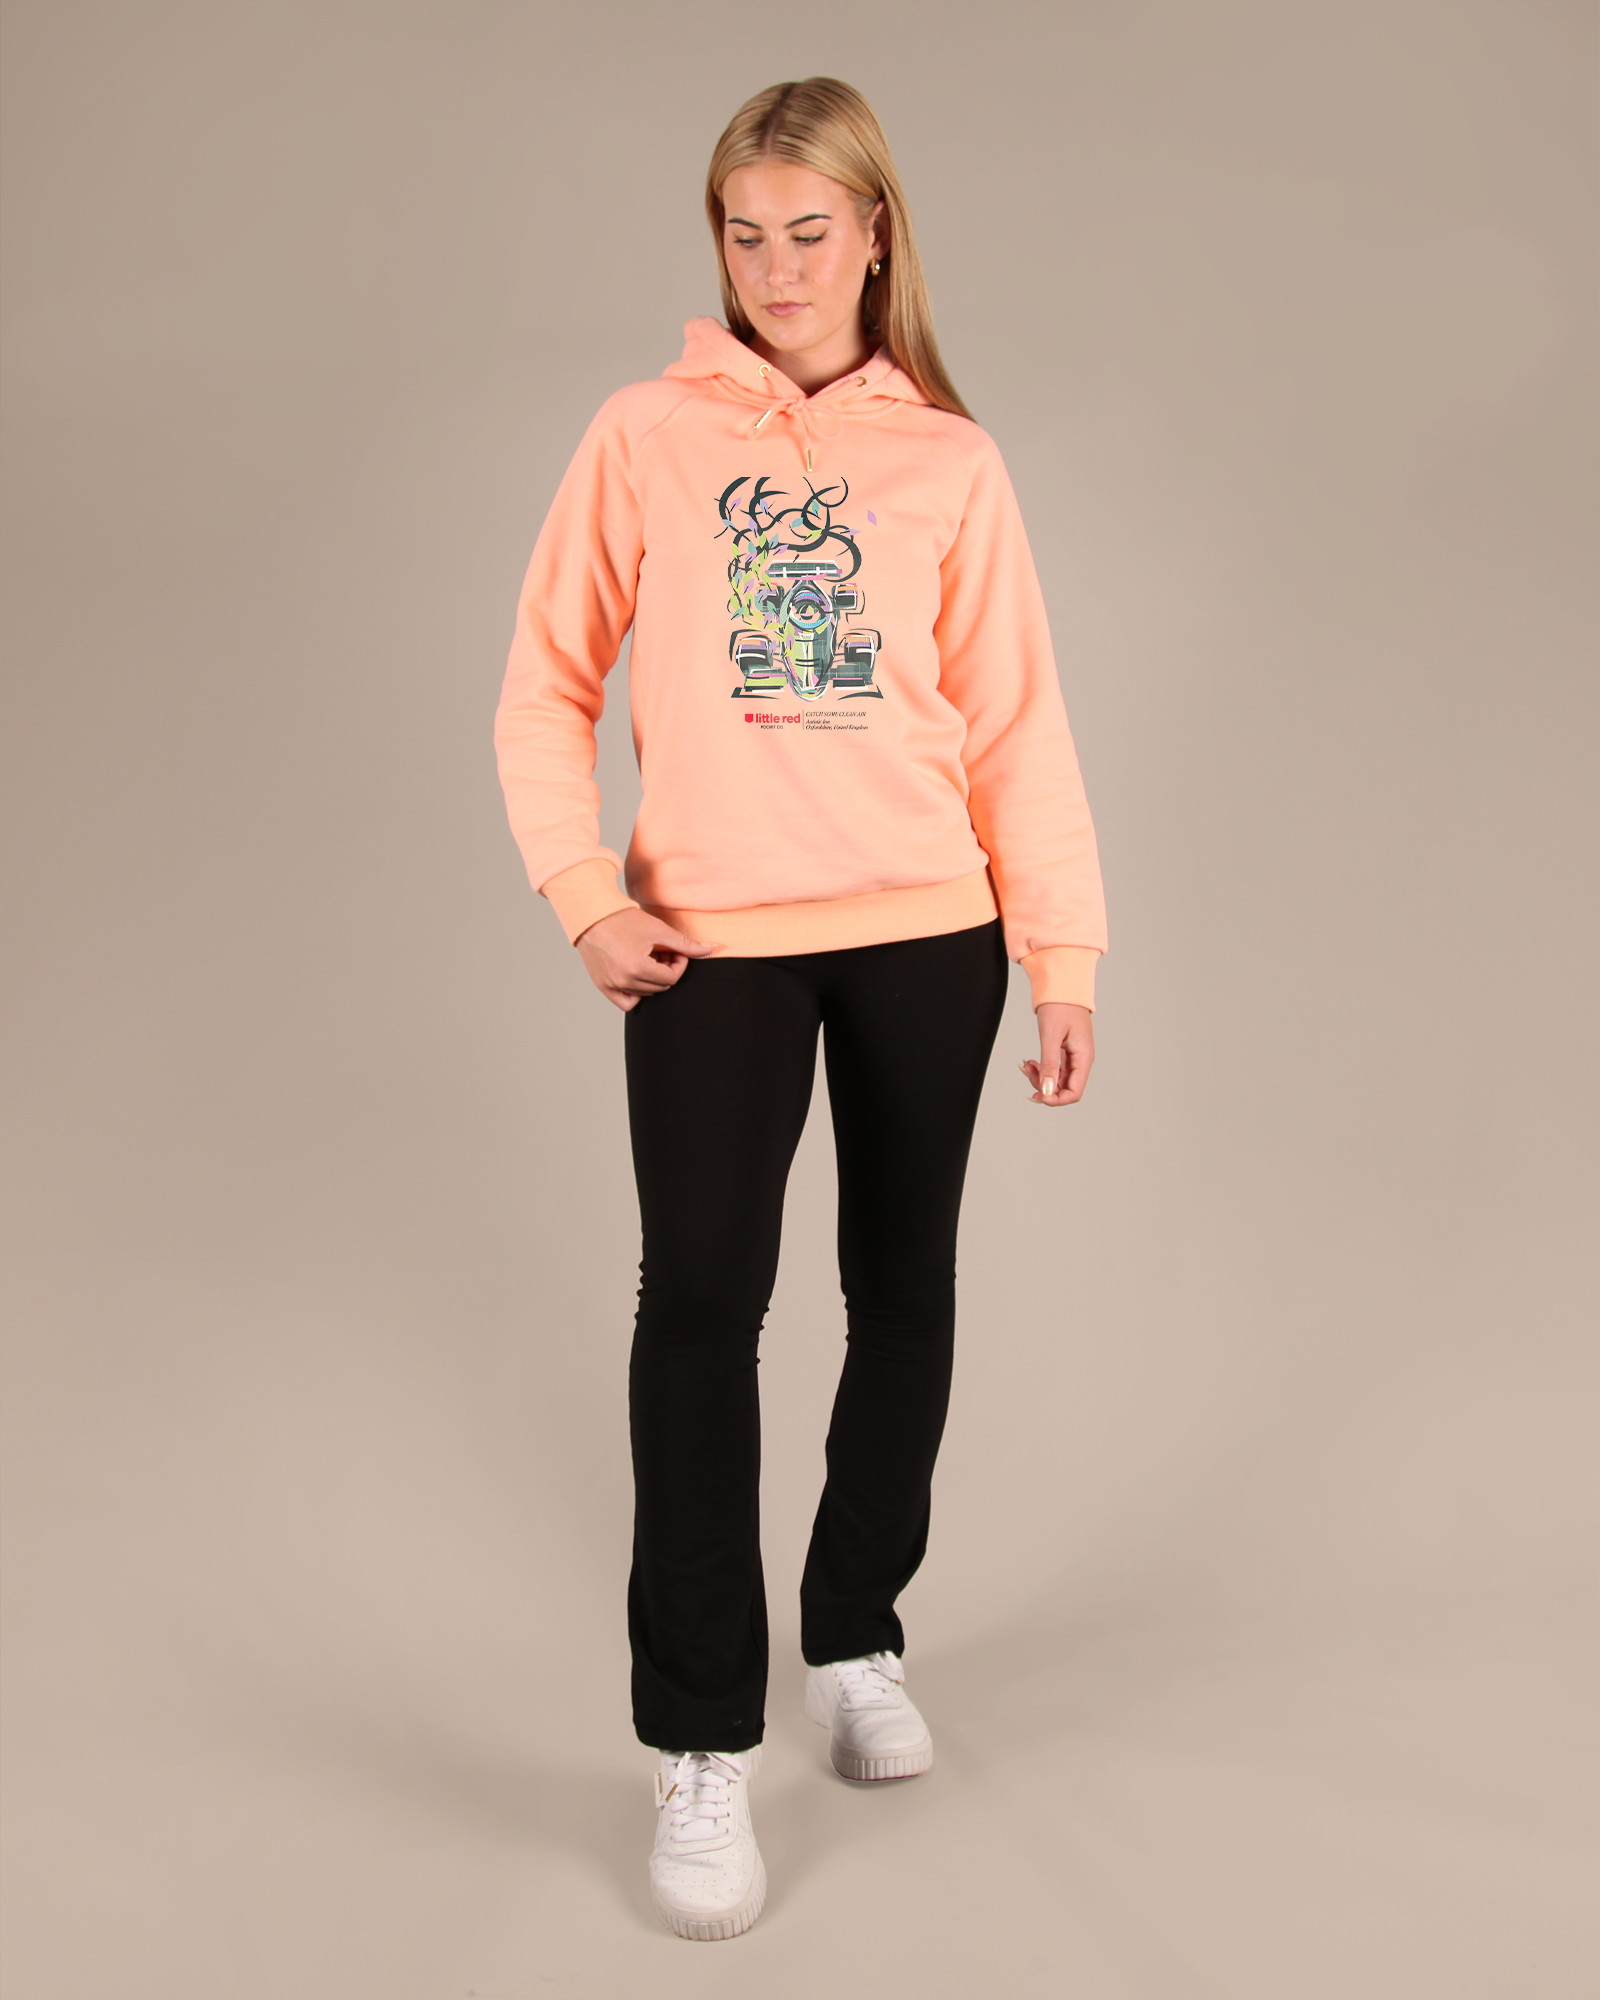 "Catch Some Clean Air" Female Hoodie - Turquoise